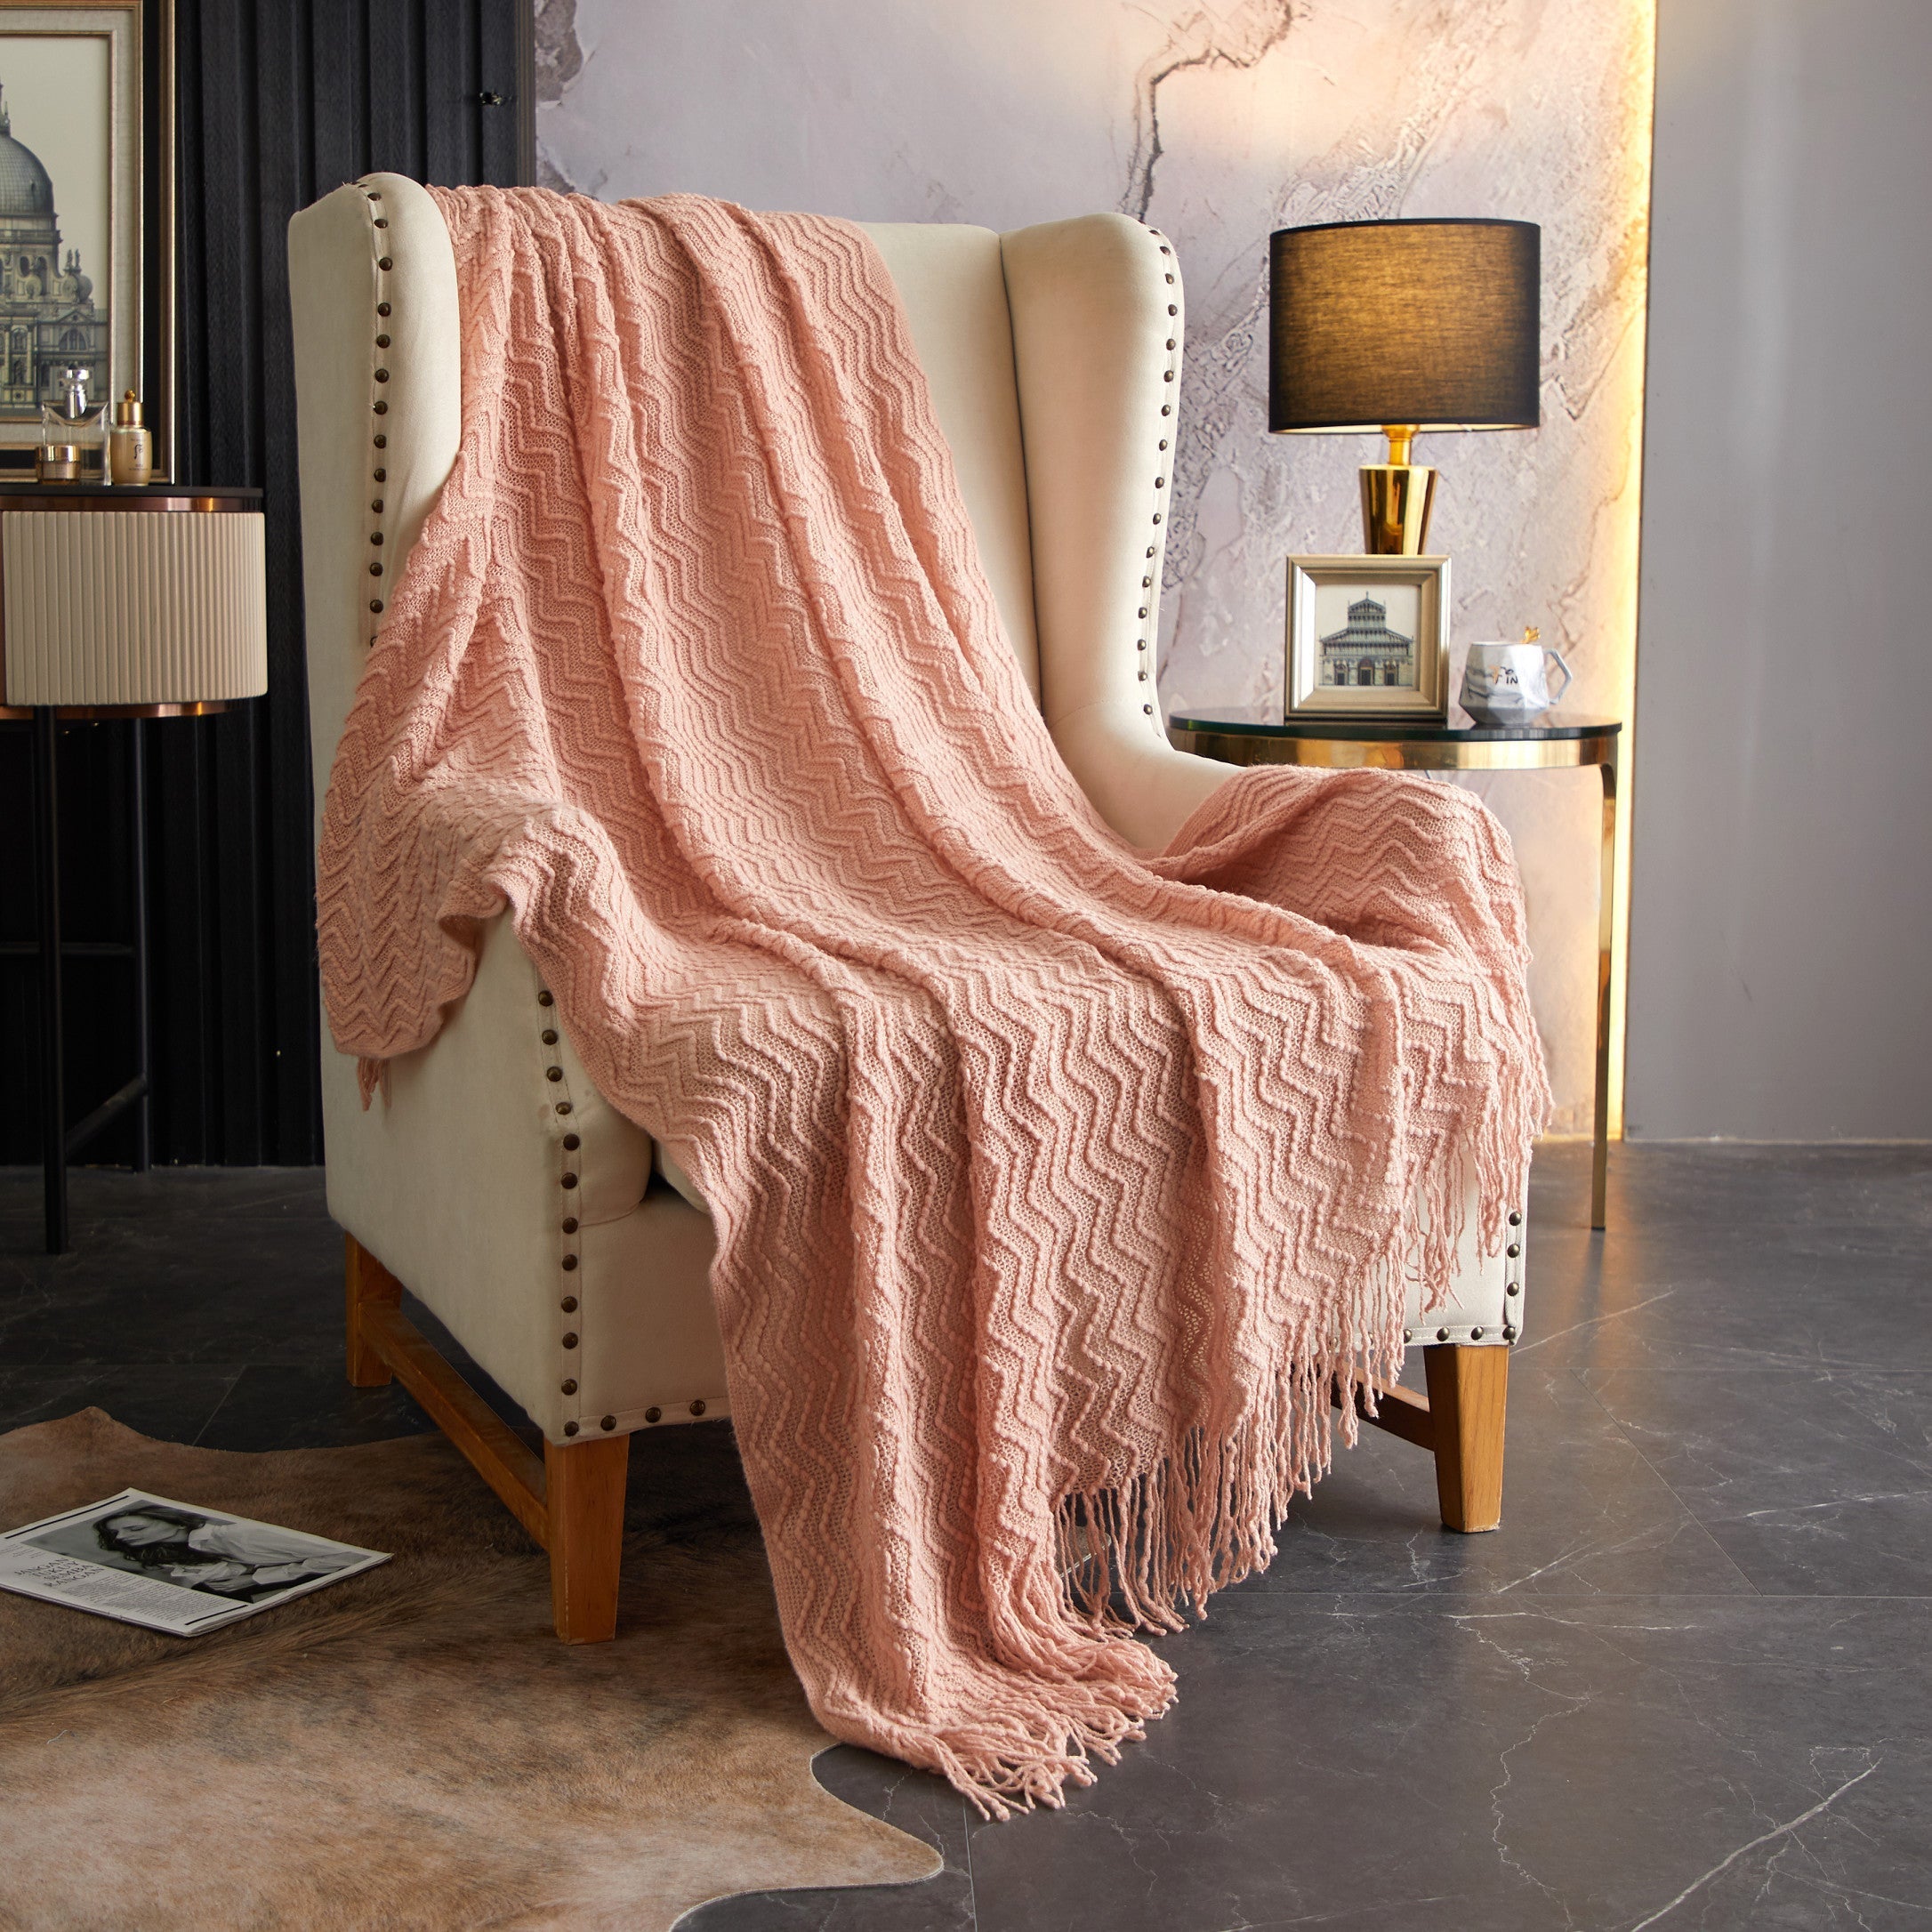 NY&C Home Newport Woven Throw Blanket Rose